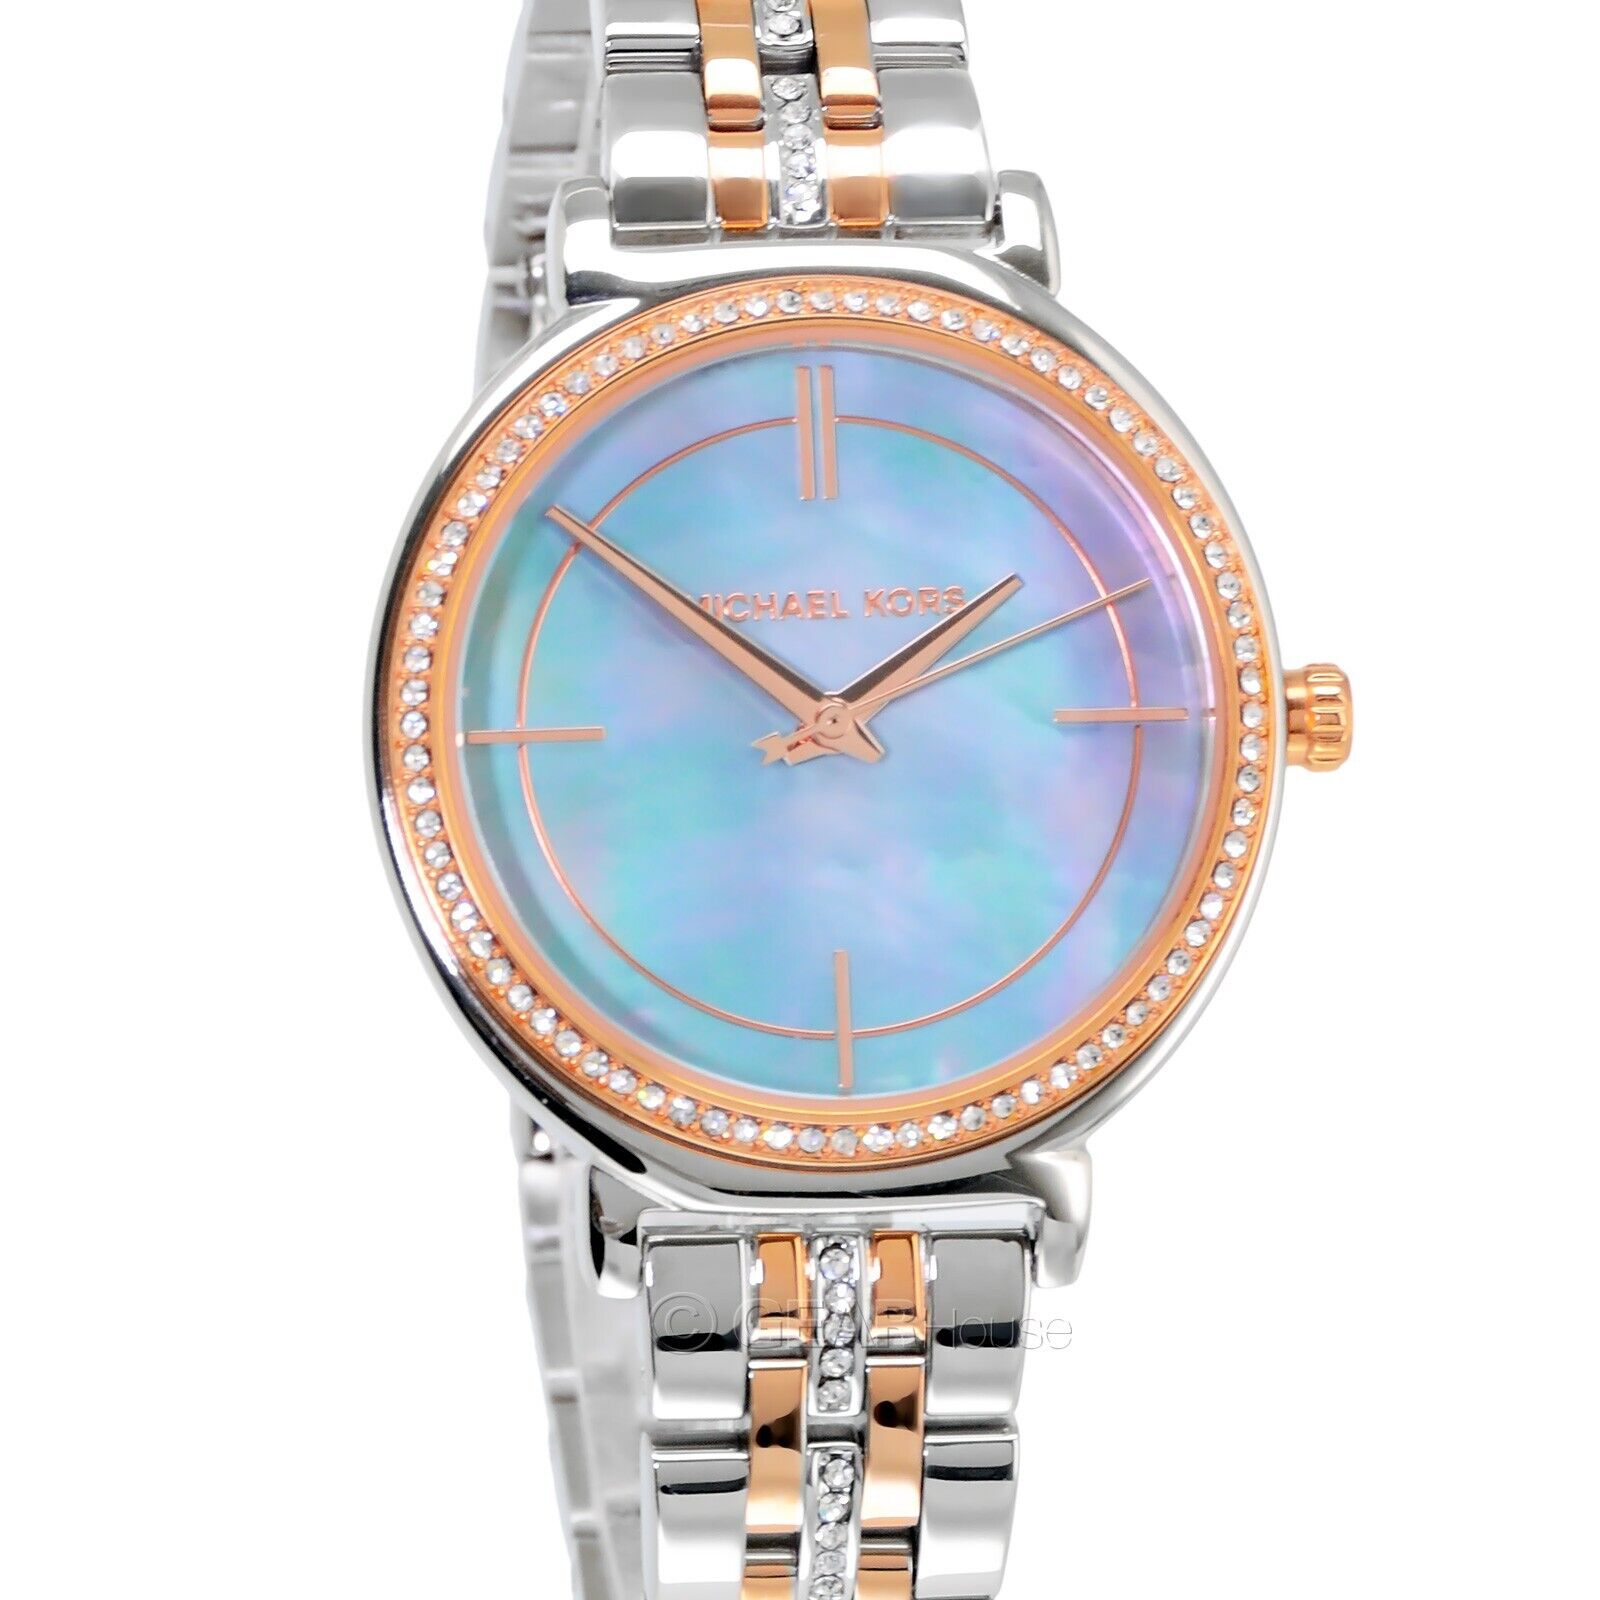 Michael Kors Cinthia Grey Mother of Pearl Dial Two Tone Steel Strap Watch for Women - MK3642